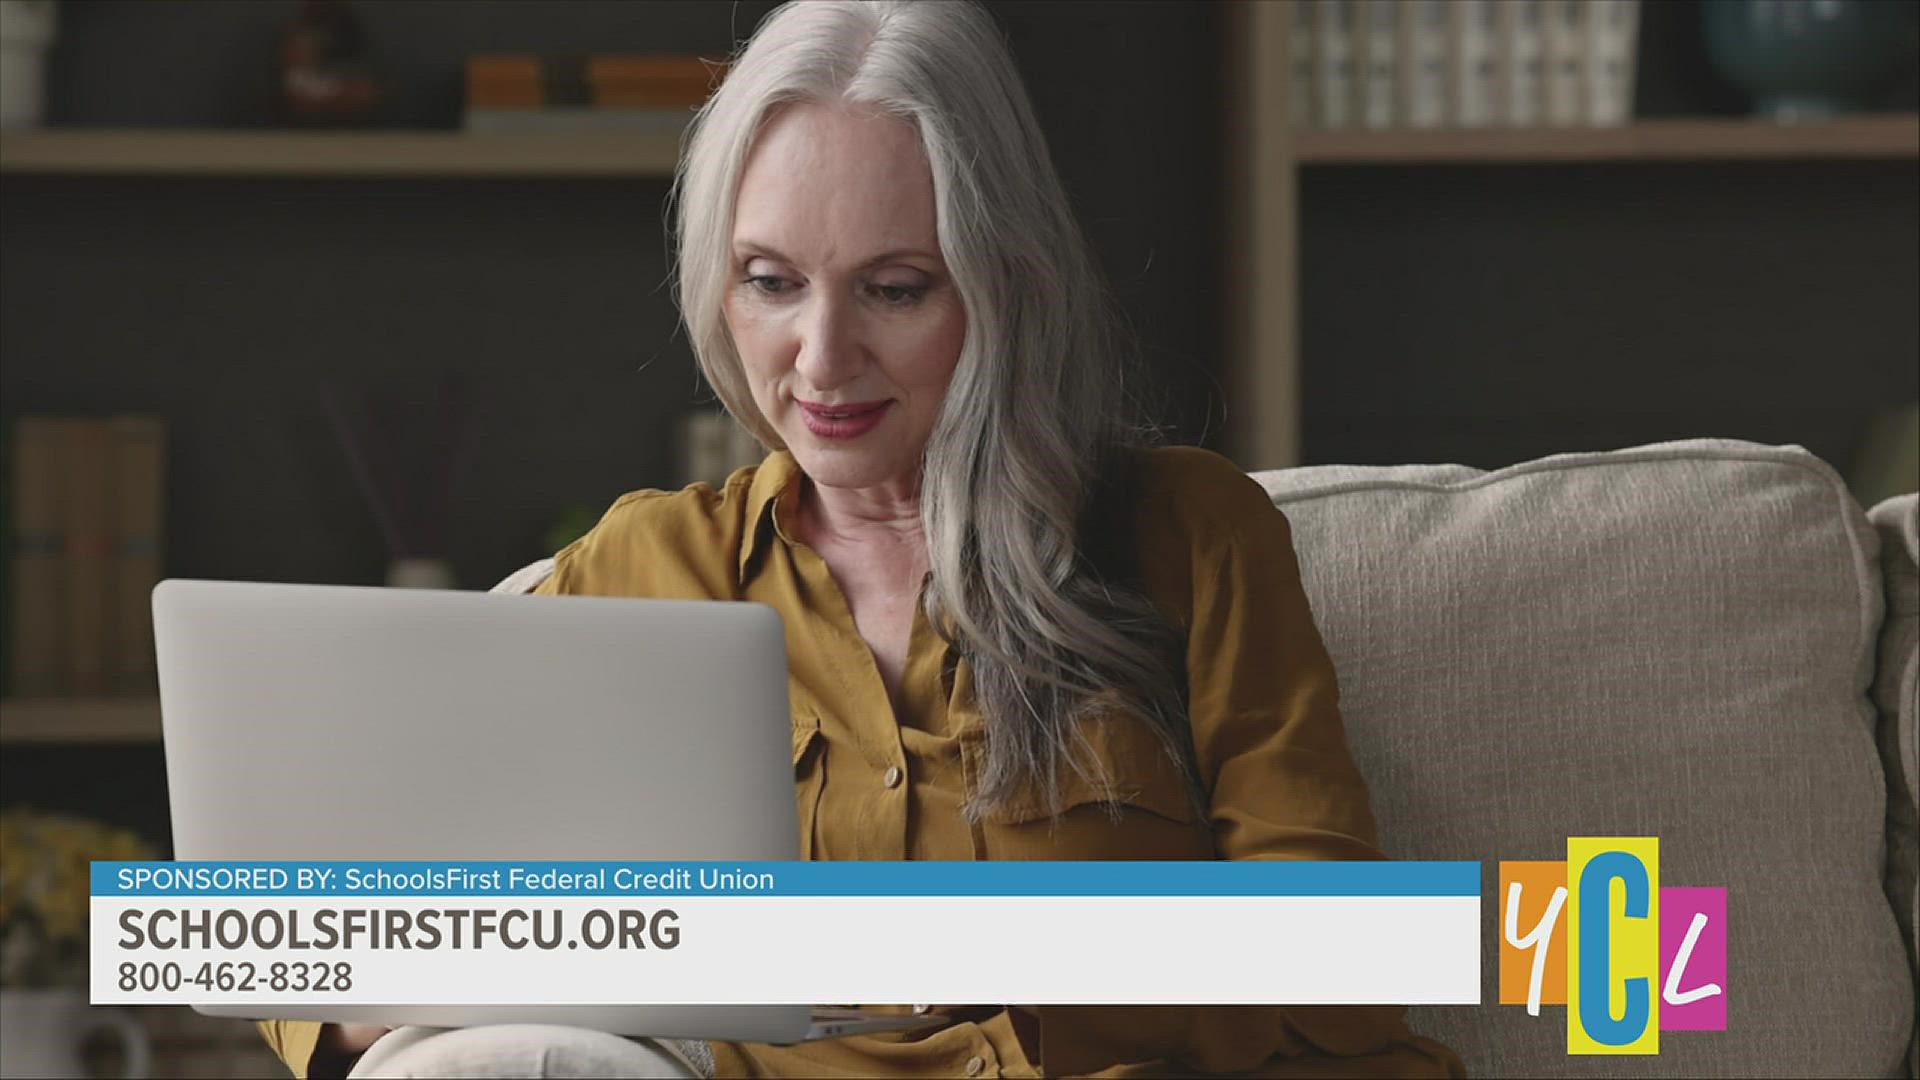 Let's talk about common cryptocurrency scams and how to avoid falling victim. This segment is paid for by Schoolsfirst Federal Credit Union.